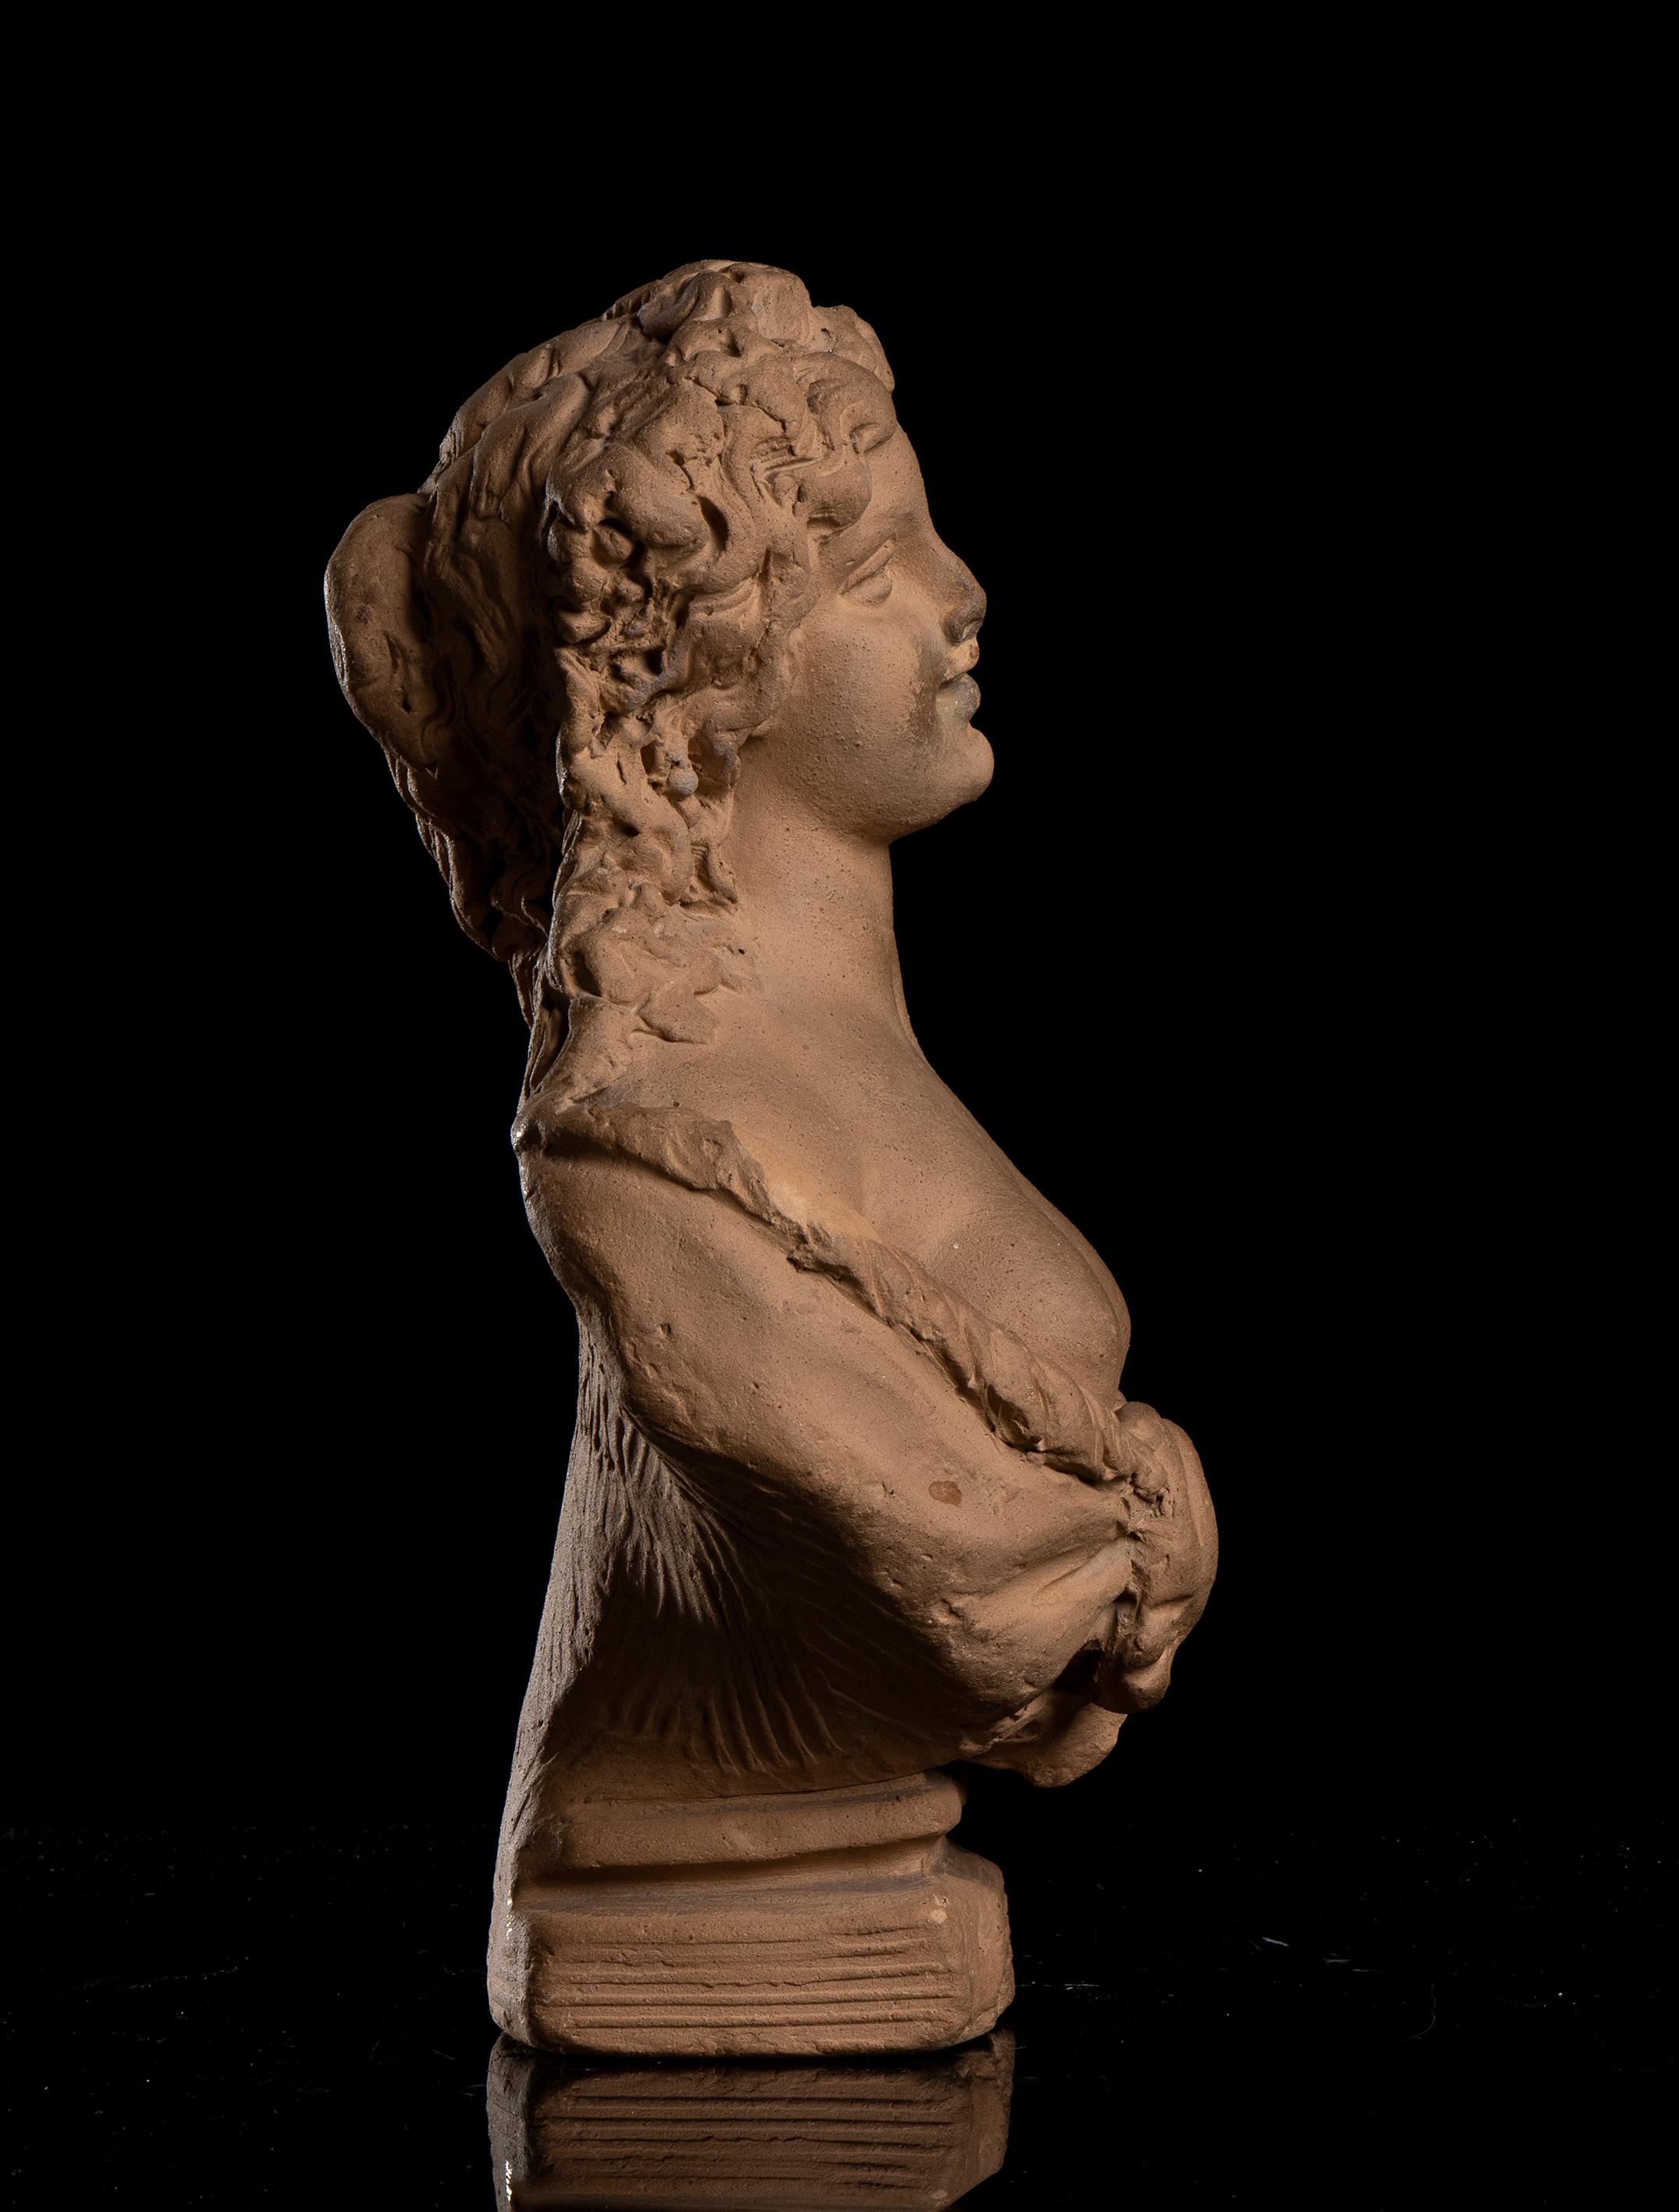 Nymph And Satyr Pair Of Sculptures Busts  By Lanzirotti Signed Terracotta 19th  16